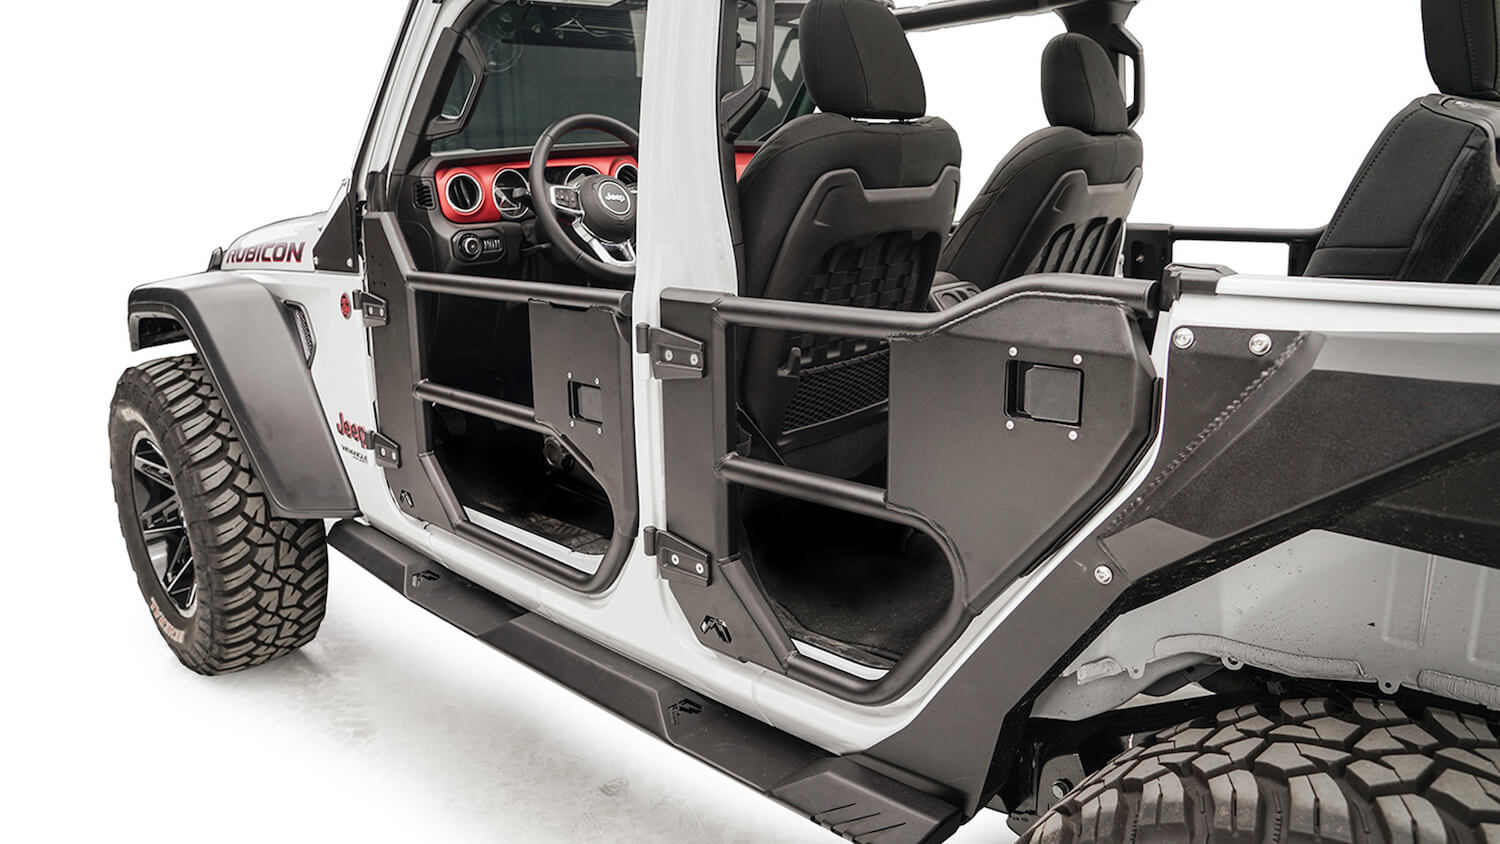 Jeep Half, Full & Tube Door Buyers' Guide - The Dirt by 4WP